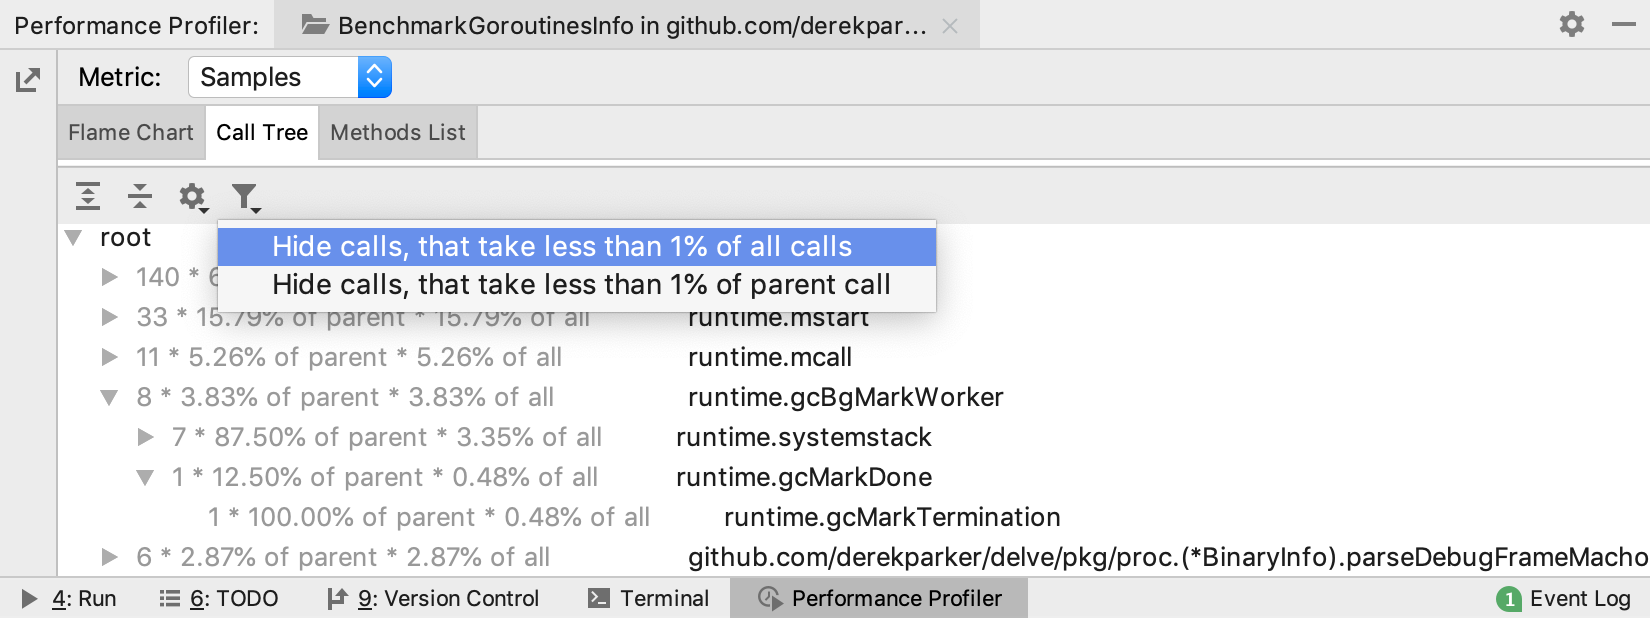 call tree tab in the profiler results